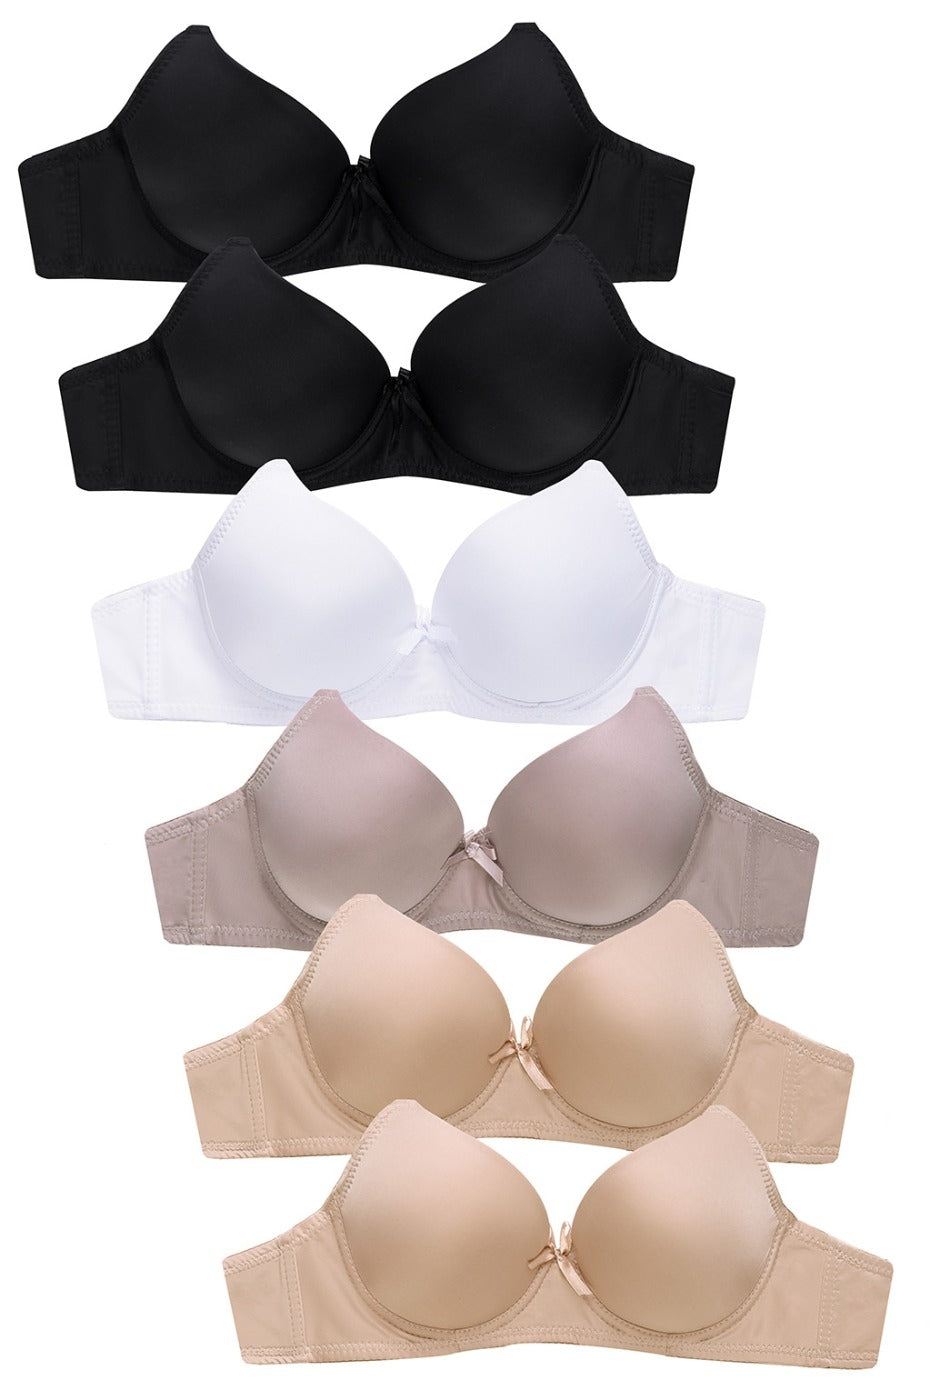 PACK OF 6 SOFRA WOMEN'S FULL COVERAGE SOLID T SHIRT BRA NEUTRAL COLORS (BR4150P4)